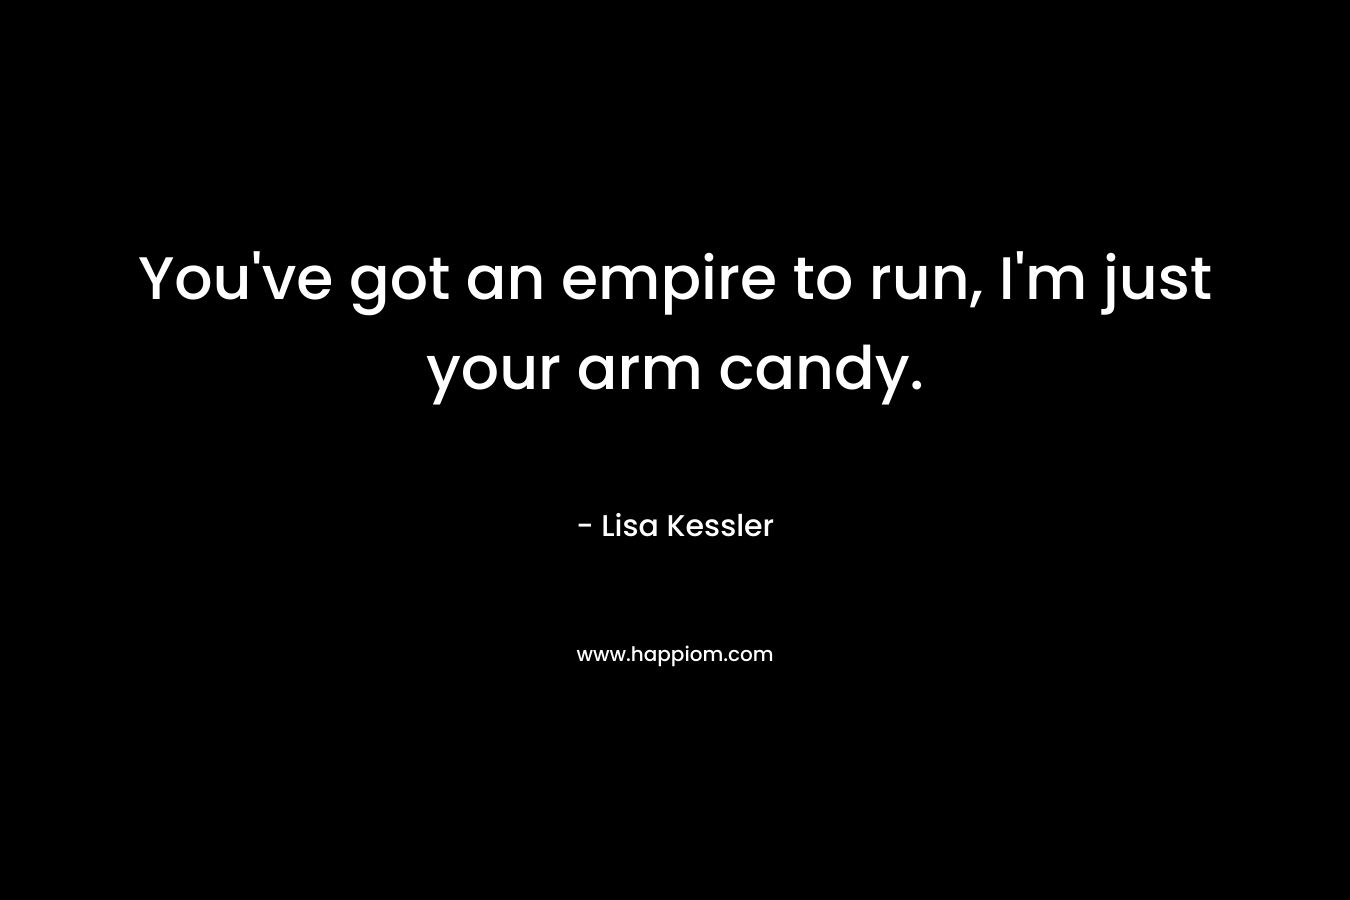 You’ve got an empire to run, I’m just your arm candy. – Lisa Kessler